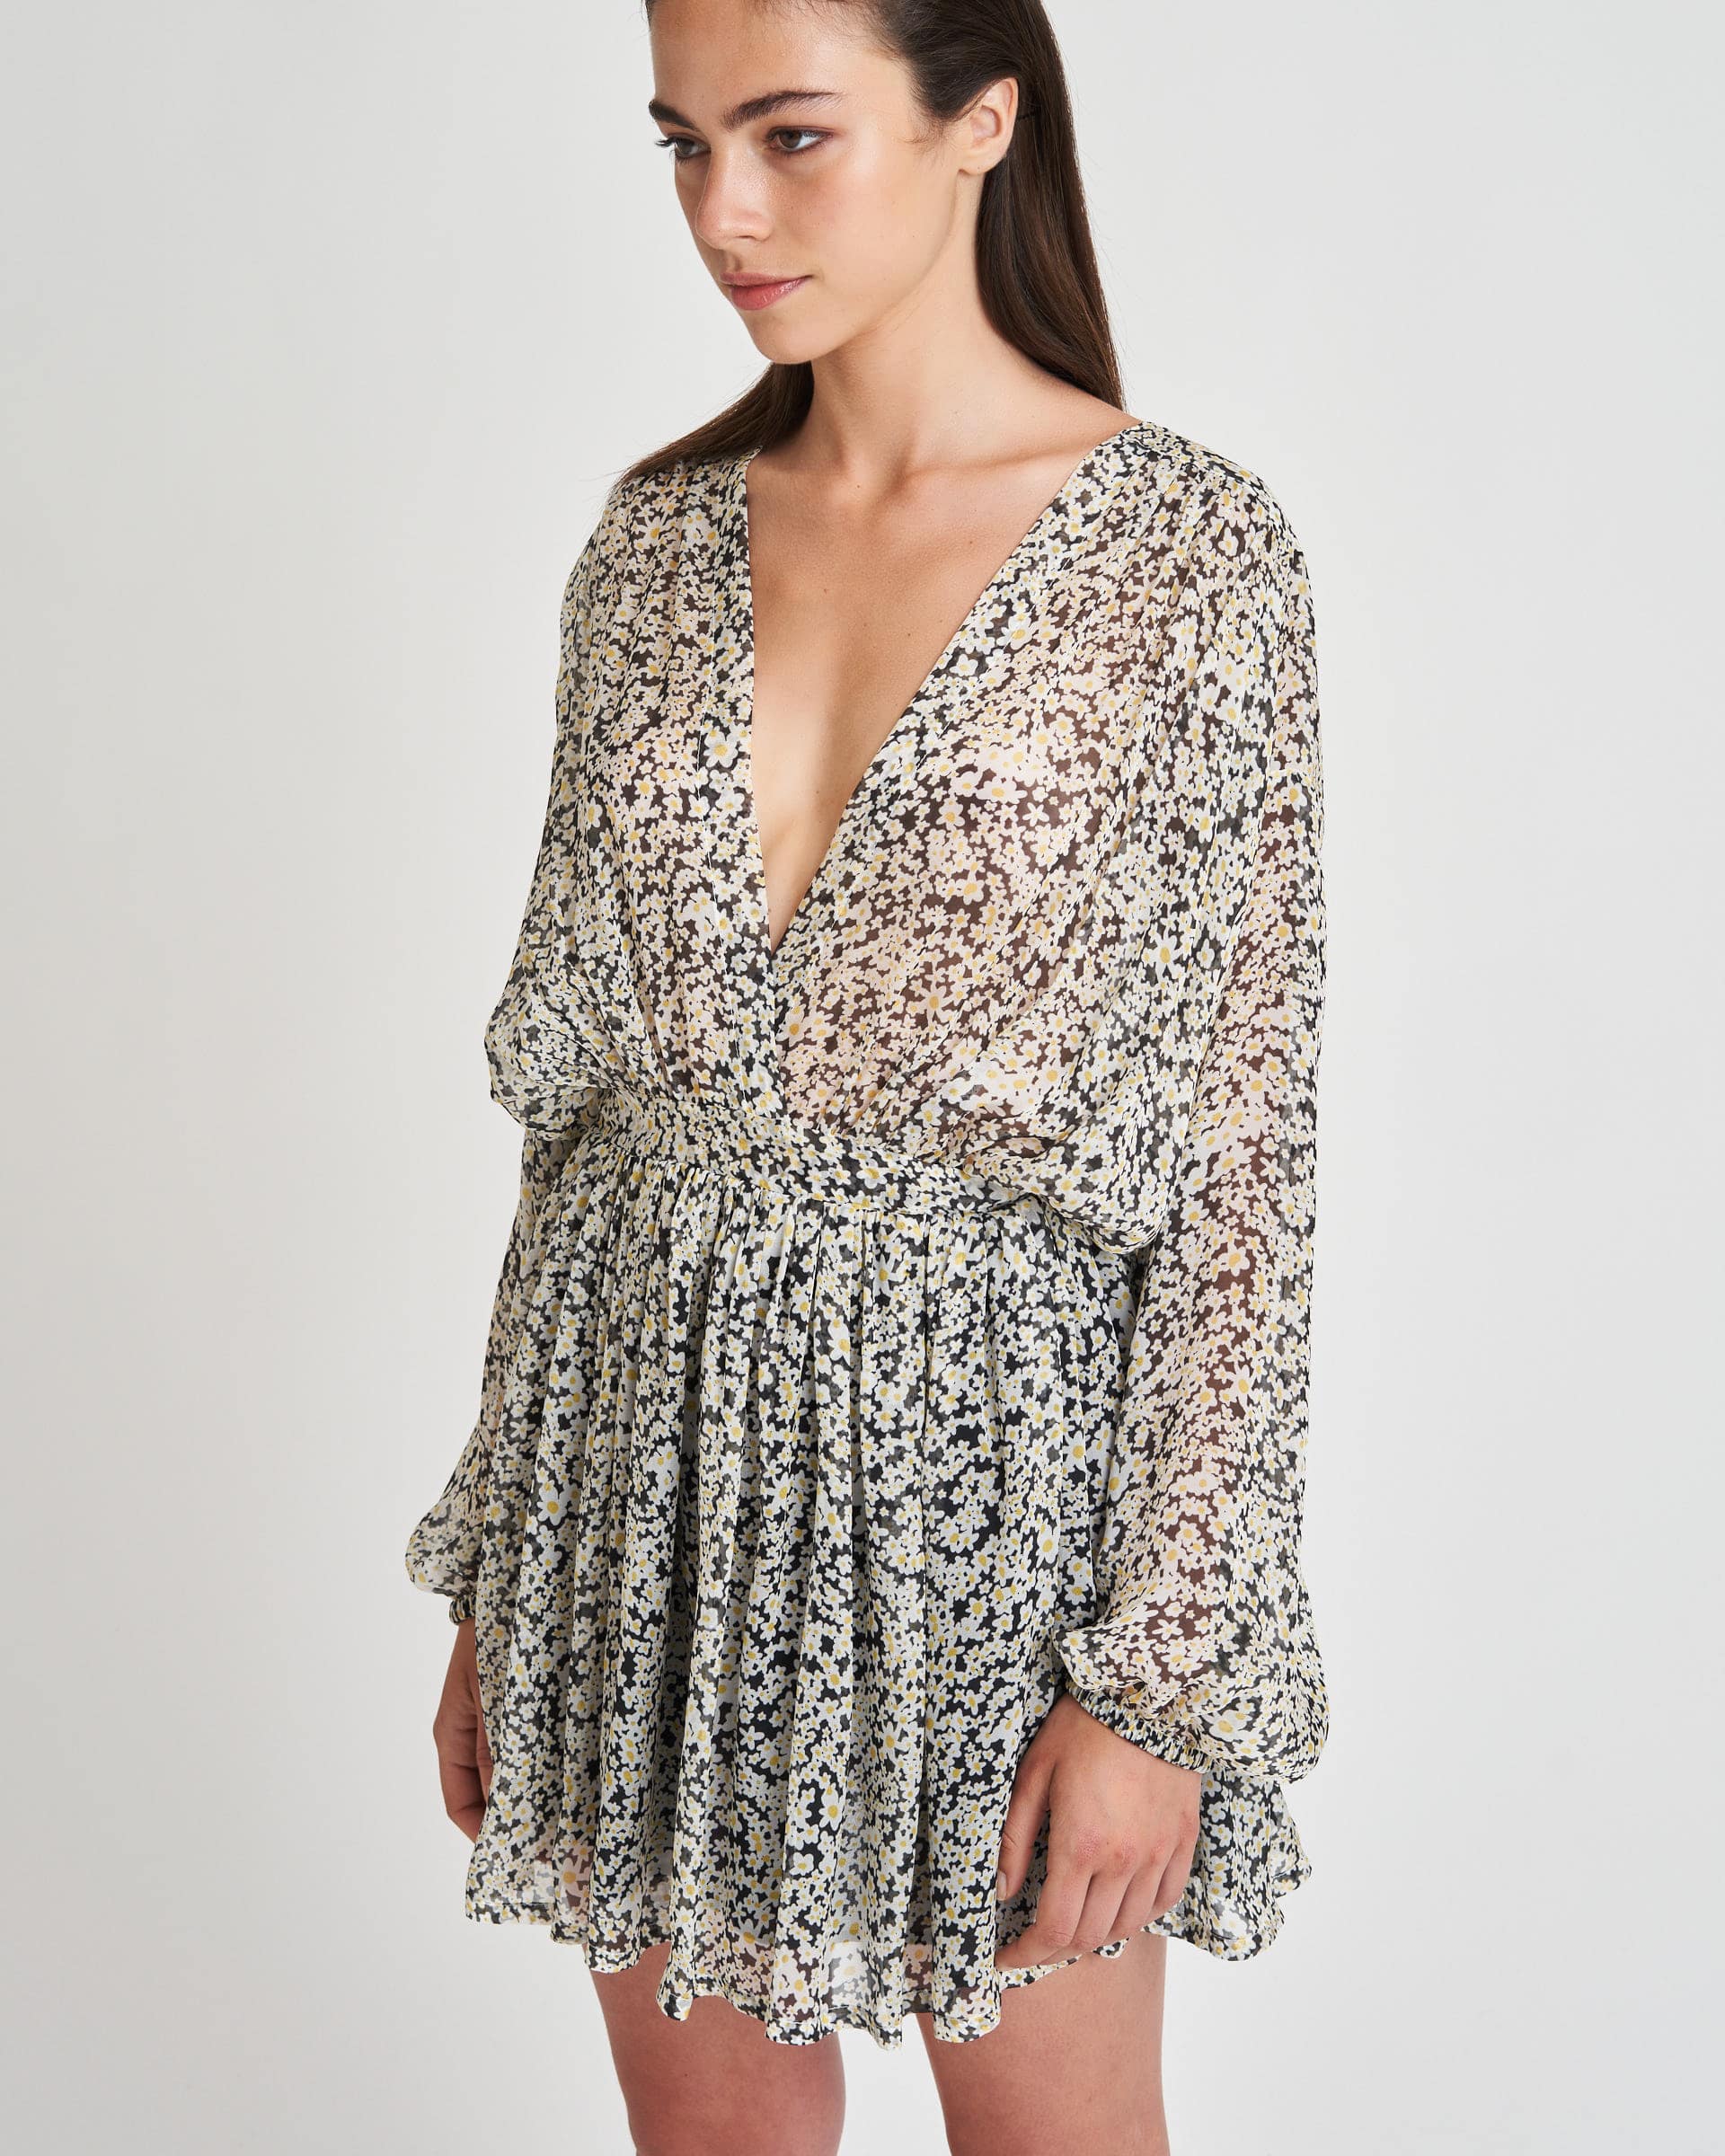 The Market Store | Silk Voile Printed Dress